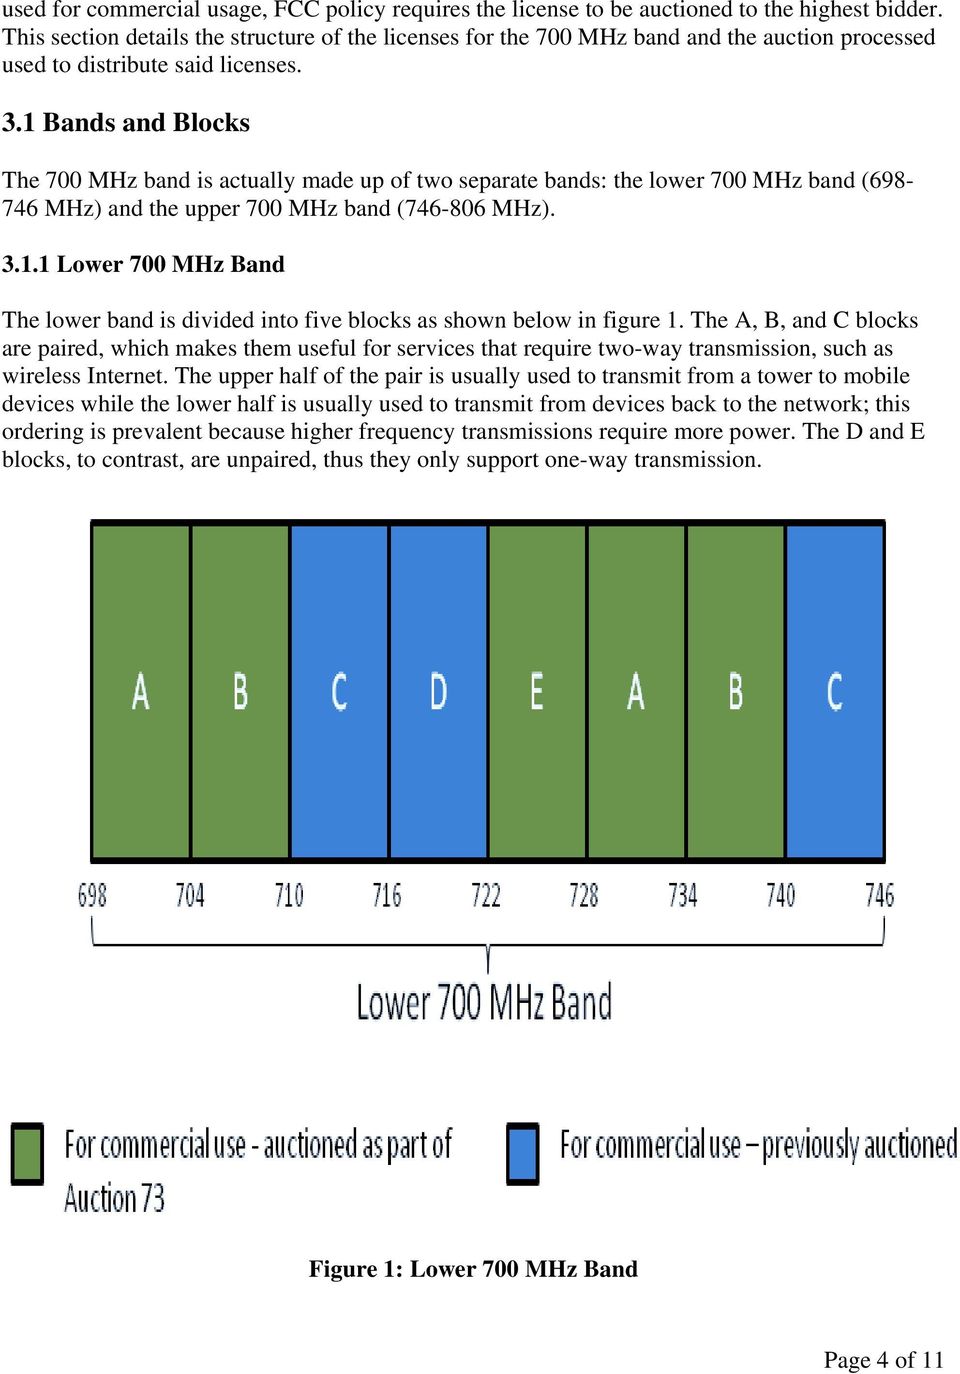 1 Bands and Blocks The 700 MHz band is actually made up of two separate bands: the lower 700 MHz band (698-746 MHz) and the upper 700 MHz band (746-806 MHz). 3.1.1 Lower 700 MHz Band The lower band is divided into five blocks as shown below in figure 1.